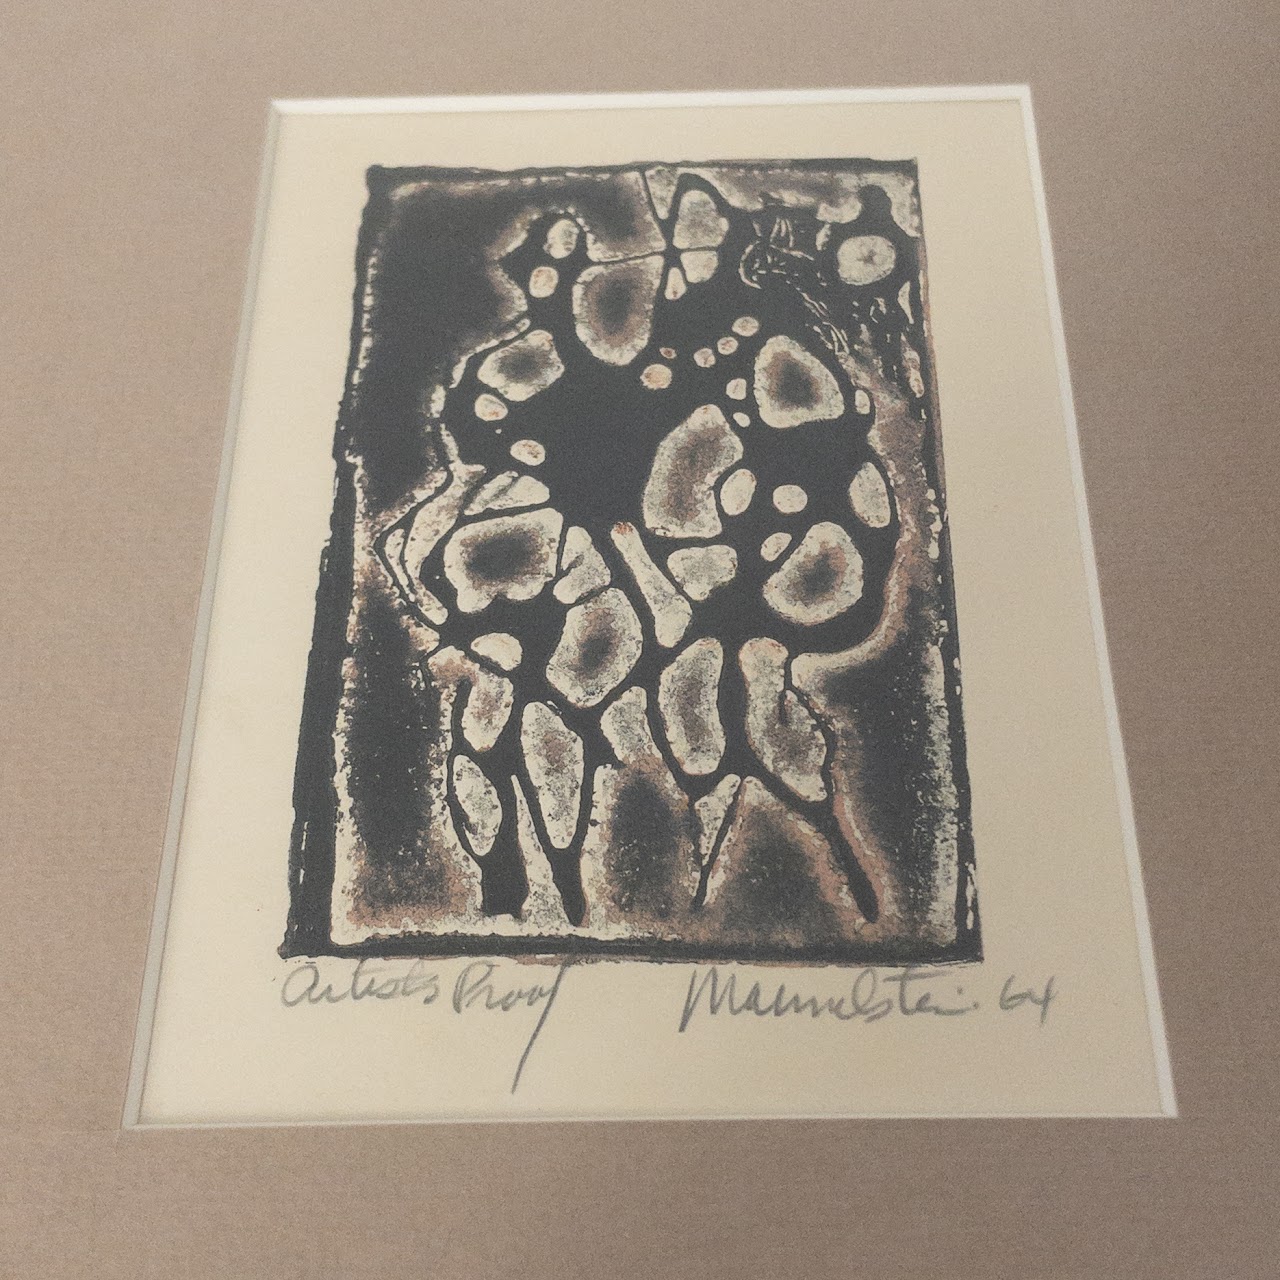 Geometric Natural Form Lithograph